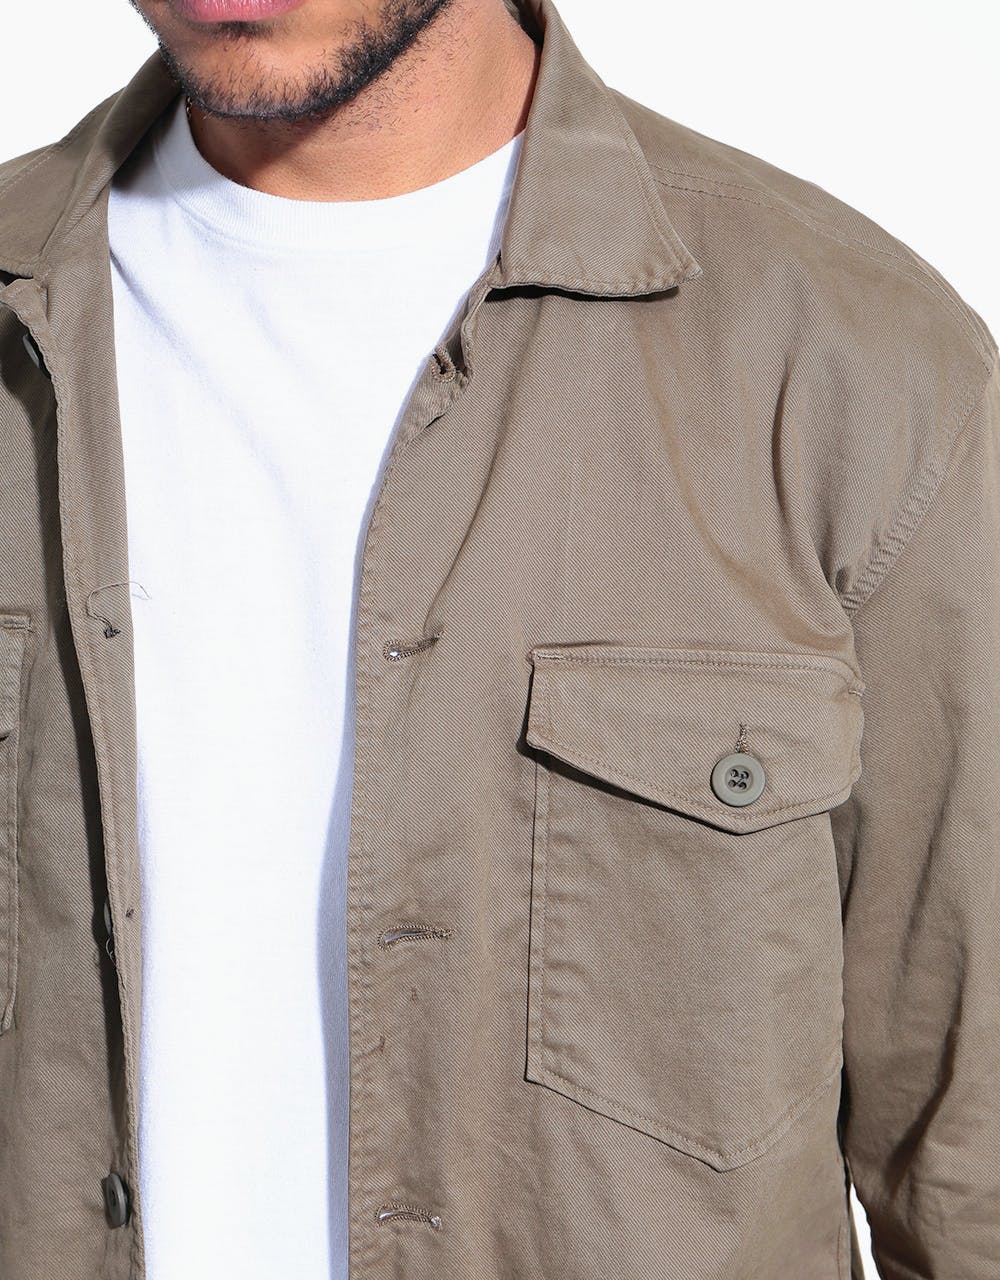 Route One Military Shirt - Olive